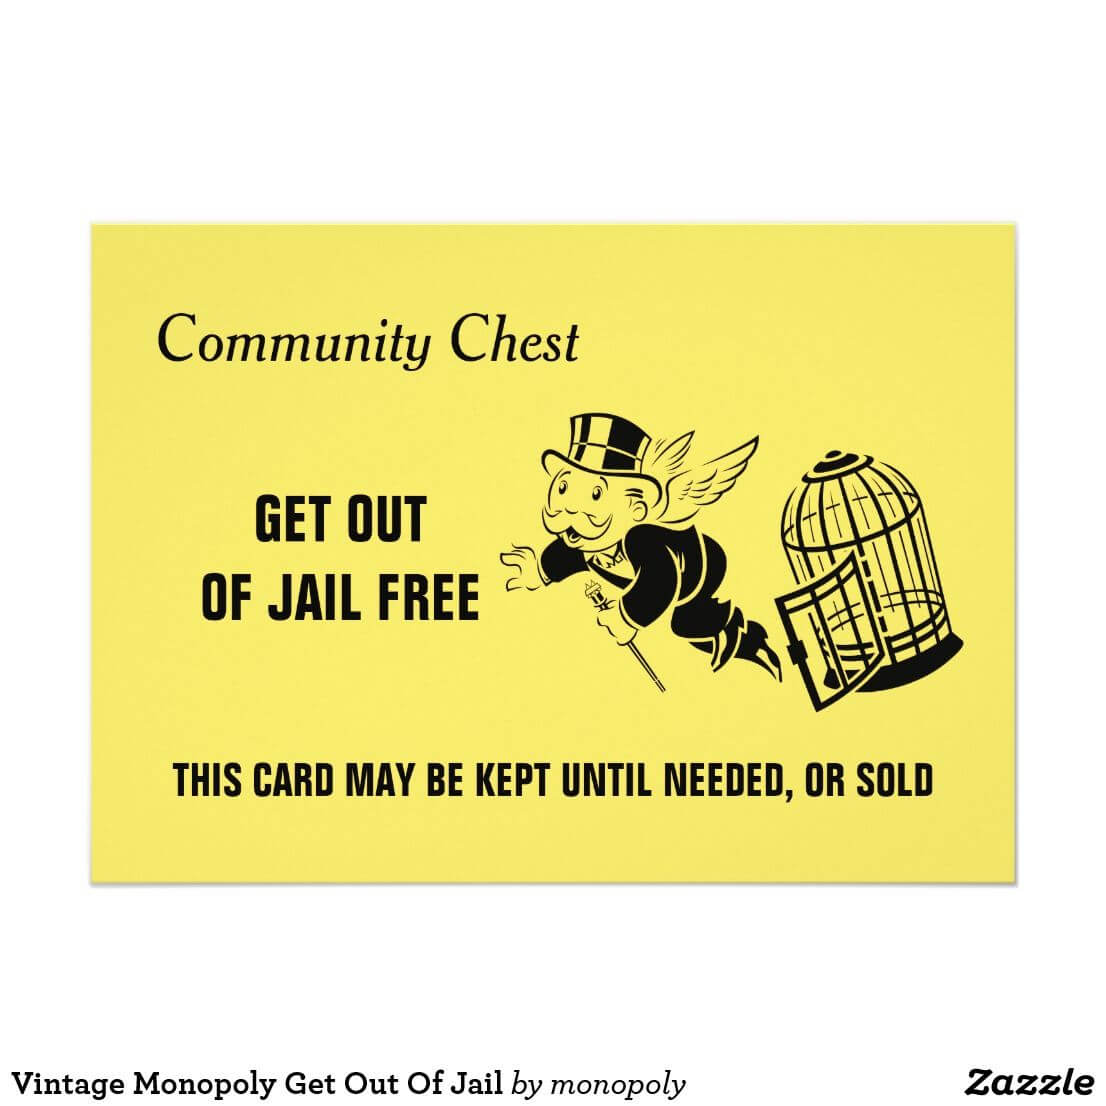 Vintage Monopoly Get Out Of Jail | Zazzle | Monopoly Inside Get Out Of Jail Free Card Template